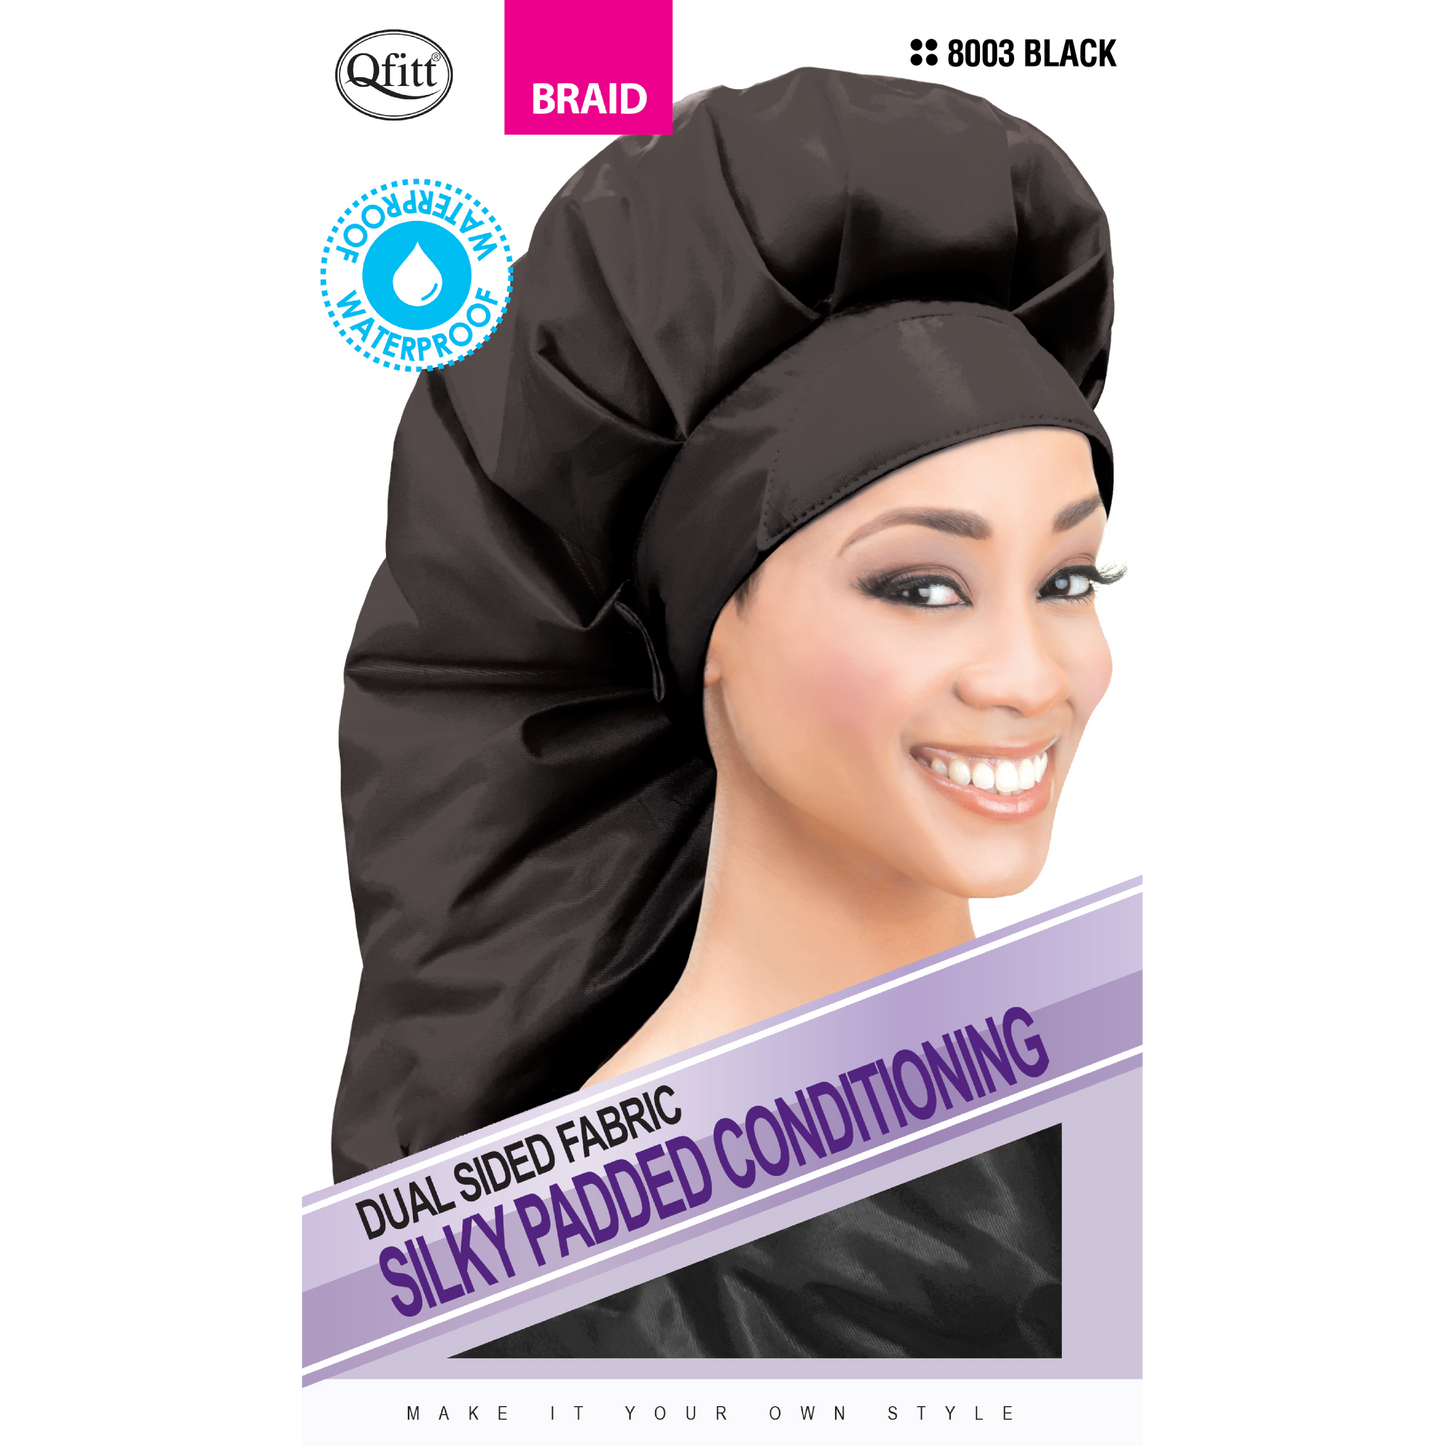 BRAID DUAL SIDED FABRIC SILKY PADDED CONDITIONING CAP